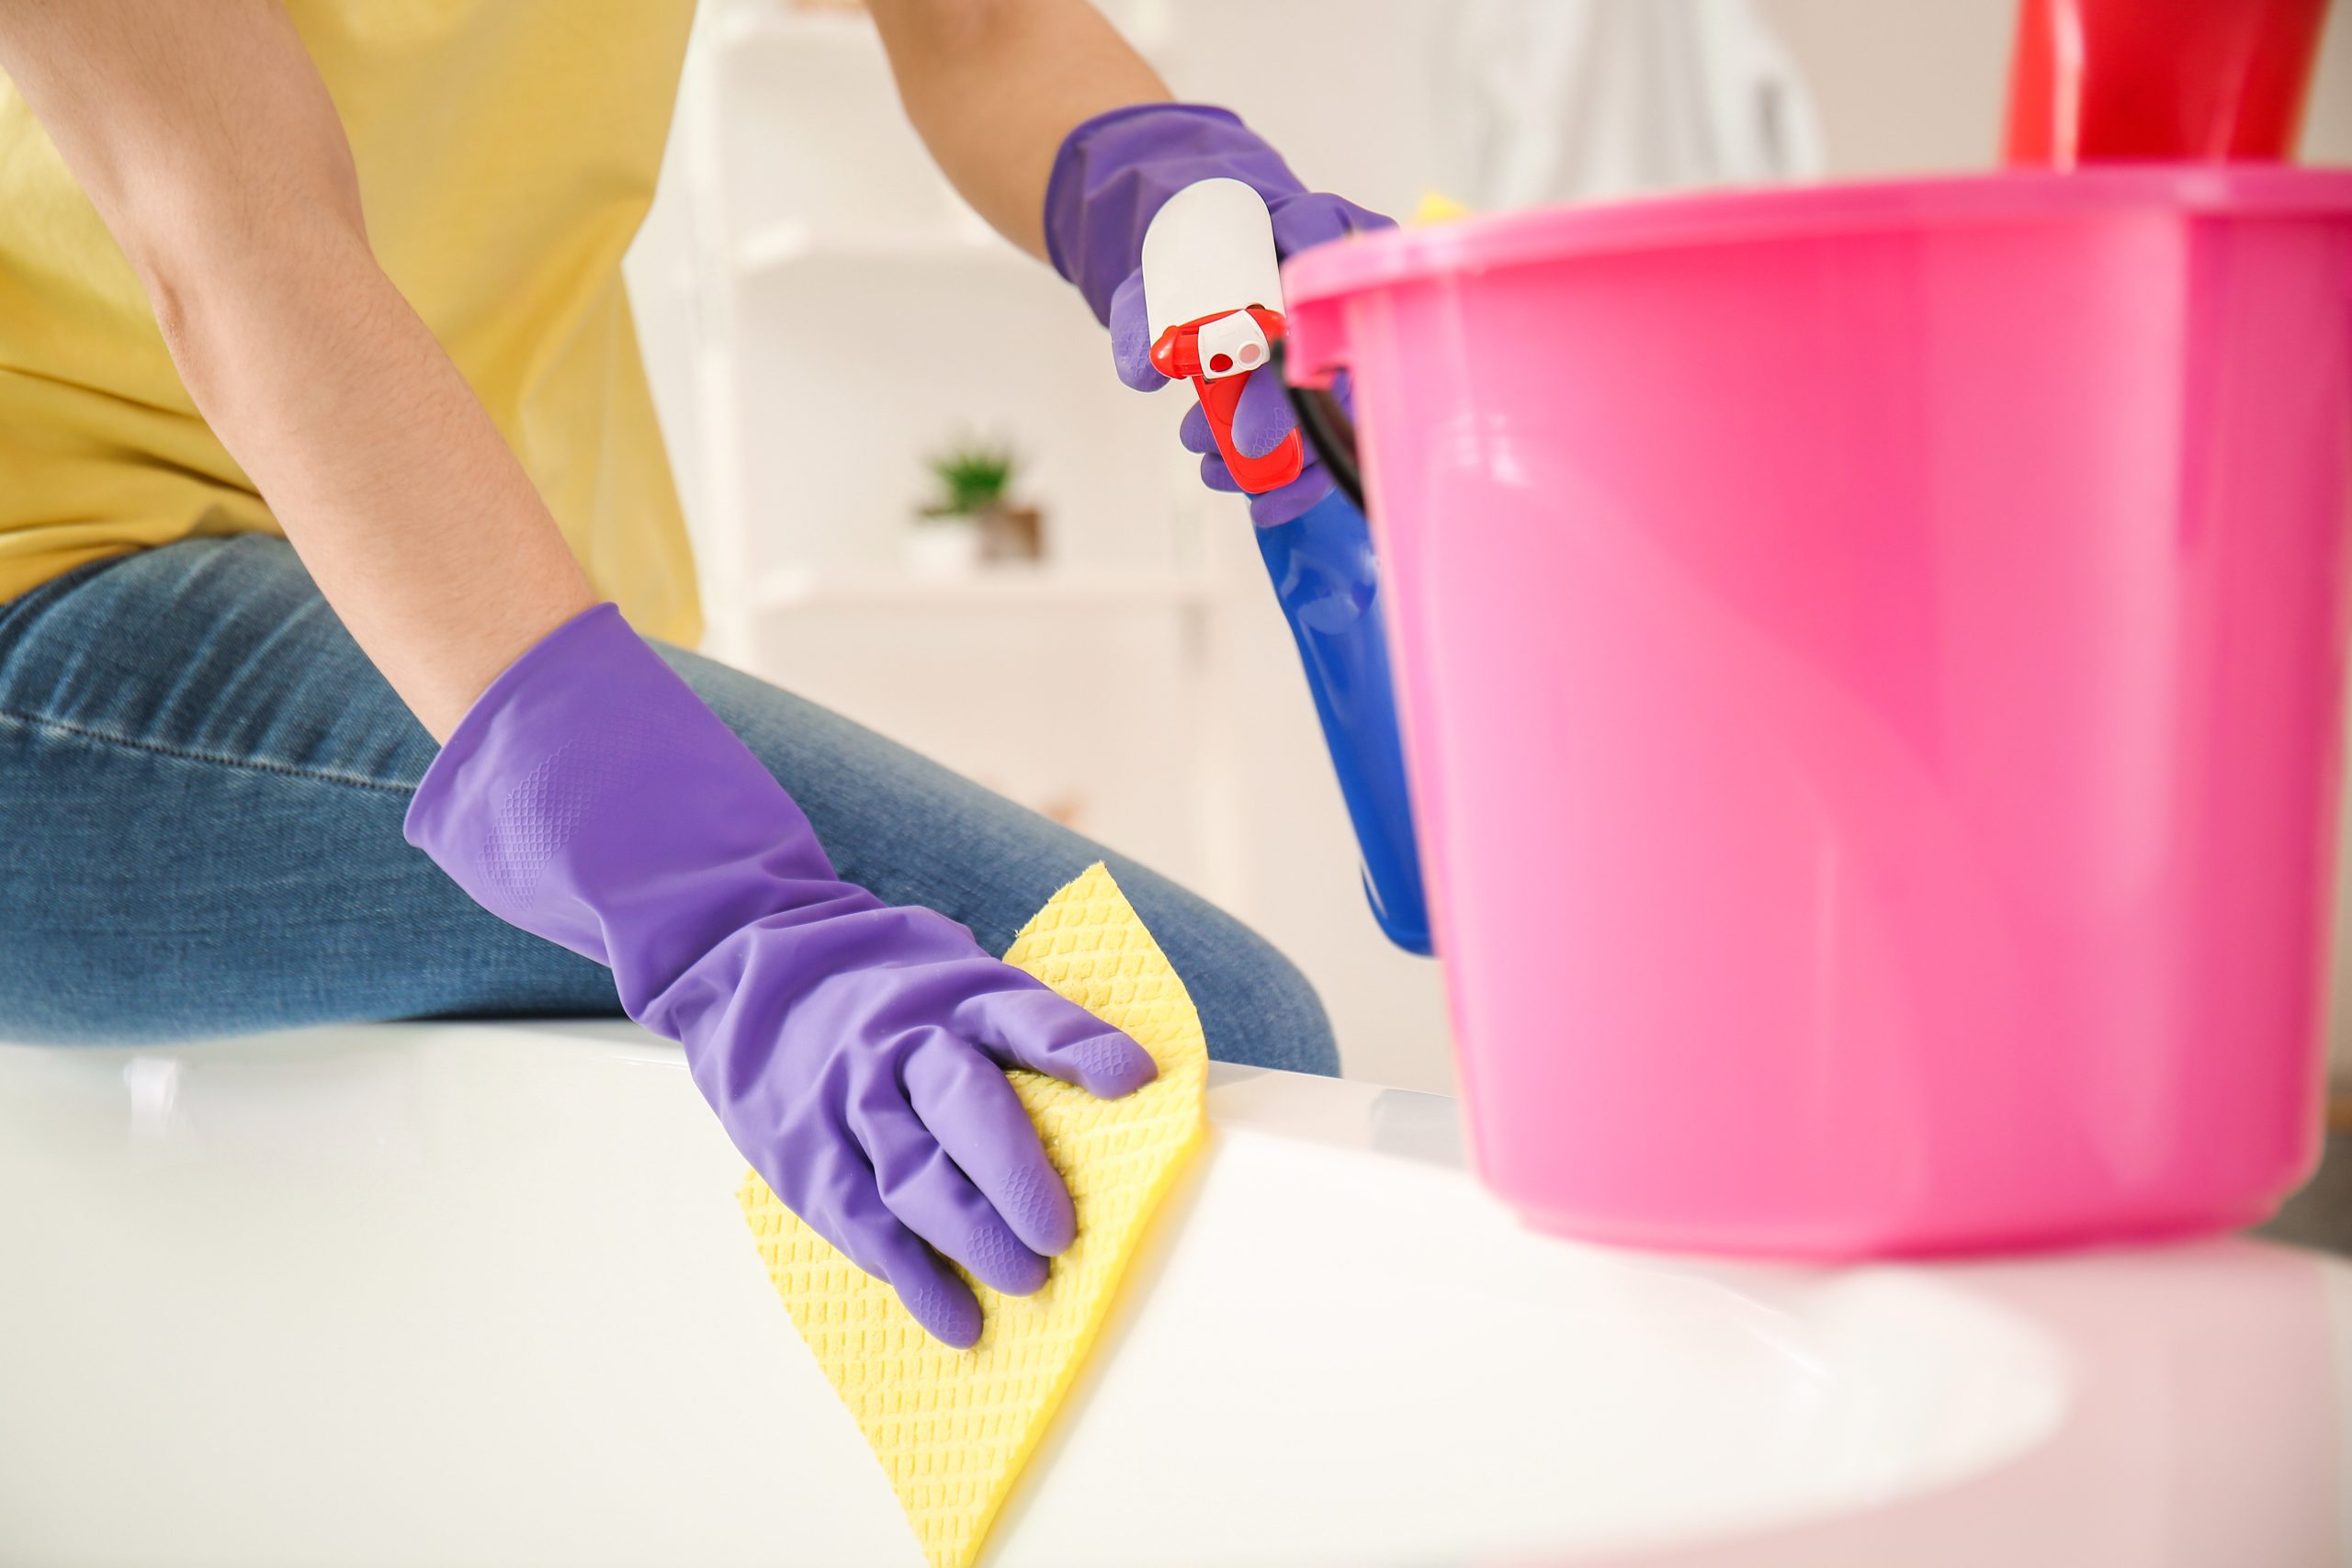 Maid Cleaning Services in Tucson AZ